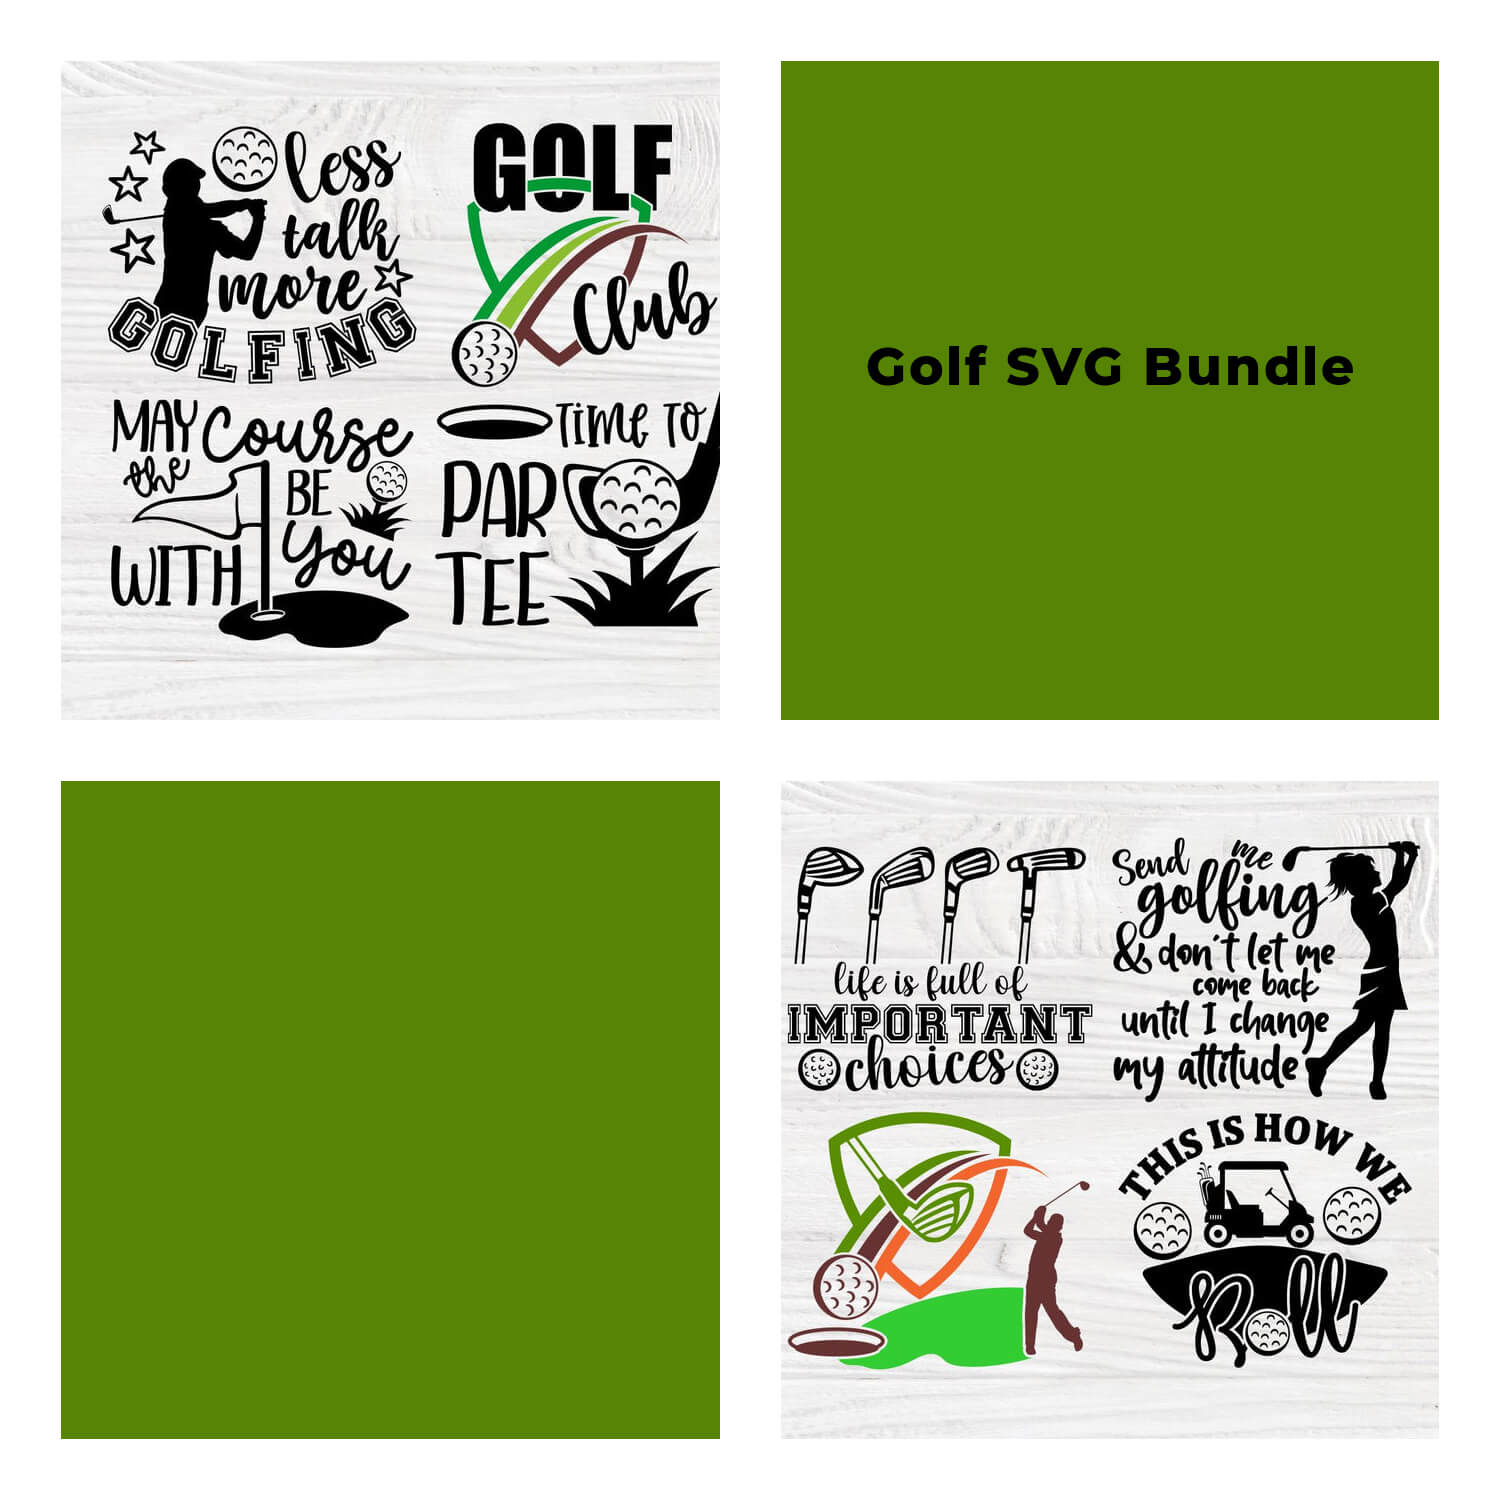 Two pictures with a green background and two pictures with golf clubs and other objects with inscriptions about golf.